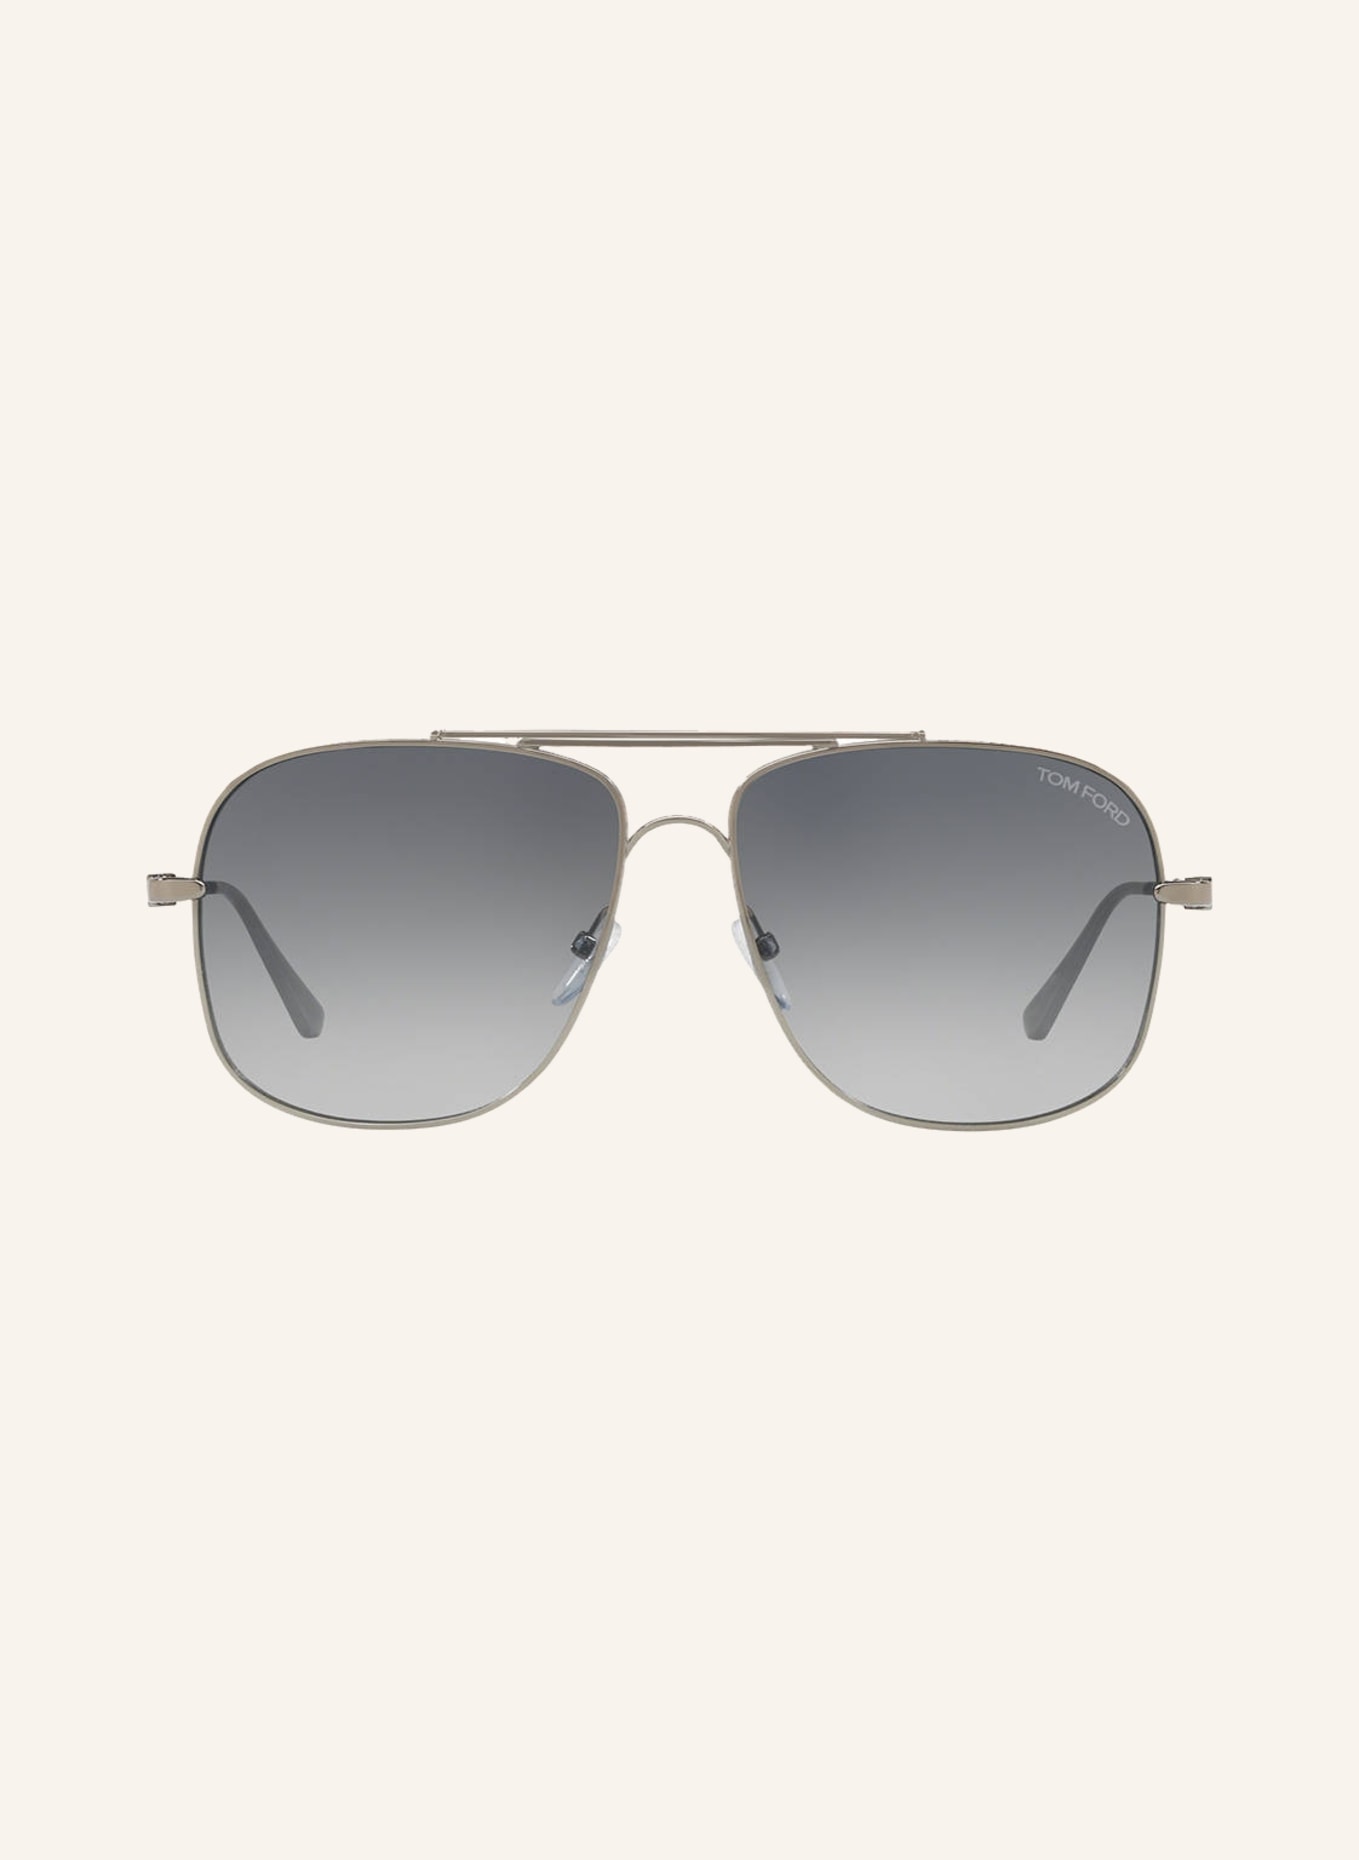 TOM FORD Sunglasses TR001025 JUDE, Color: 2880B2 - SILVER/BLUE GRADIENT (Image 2)